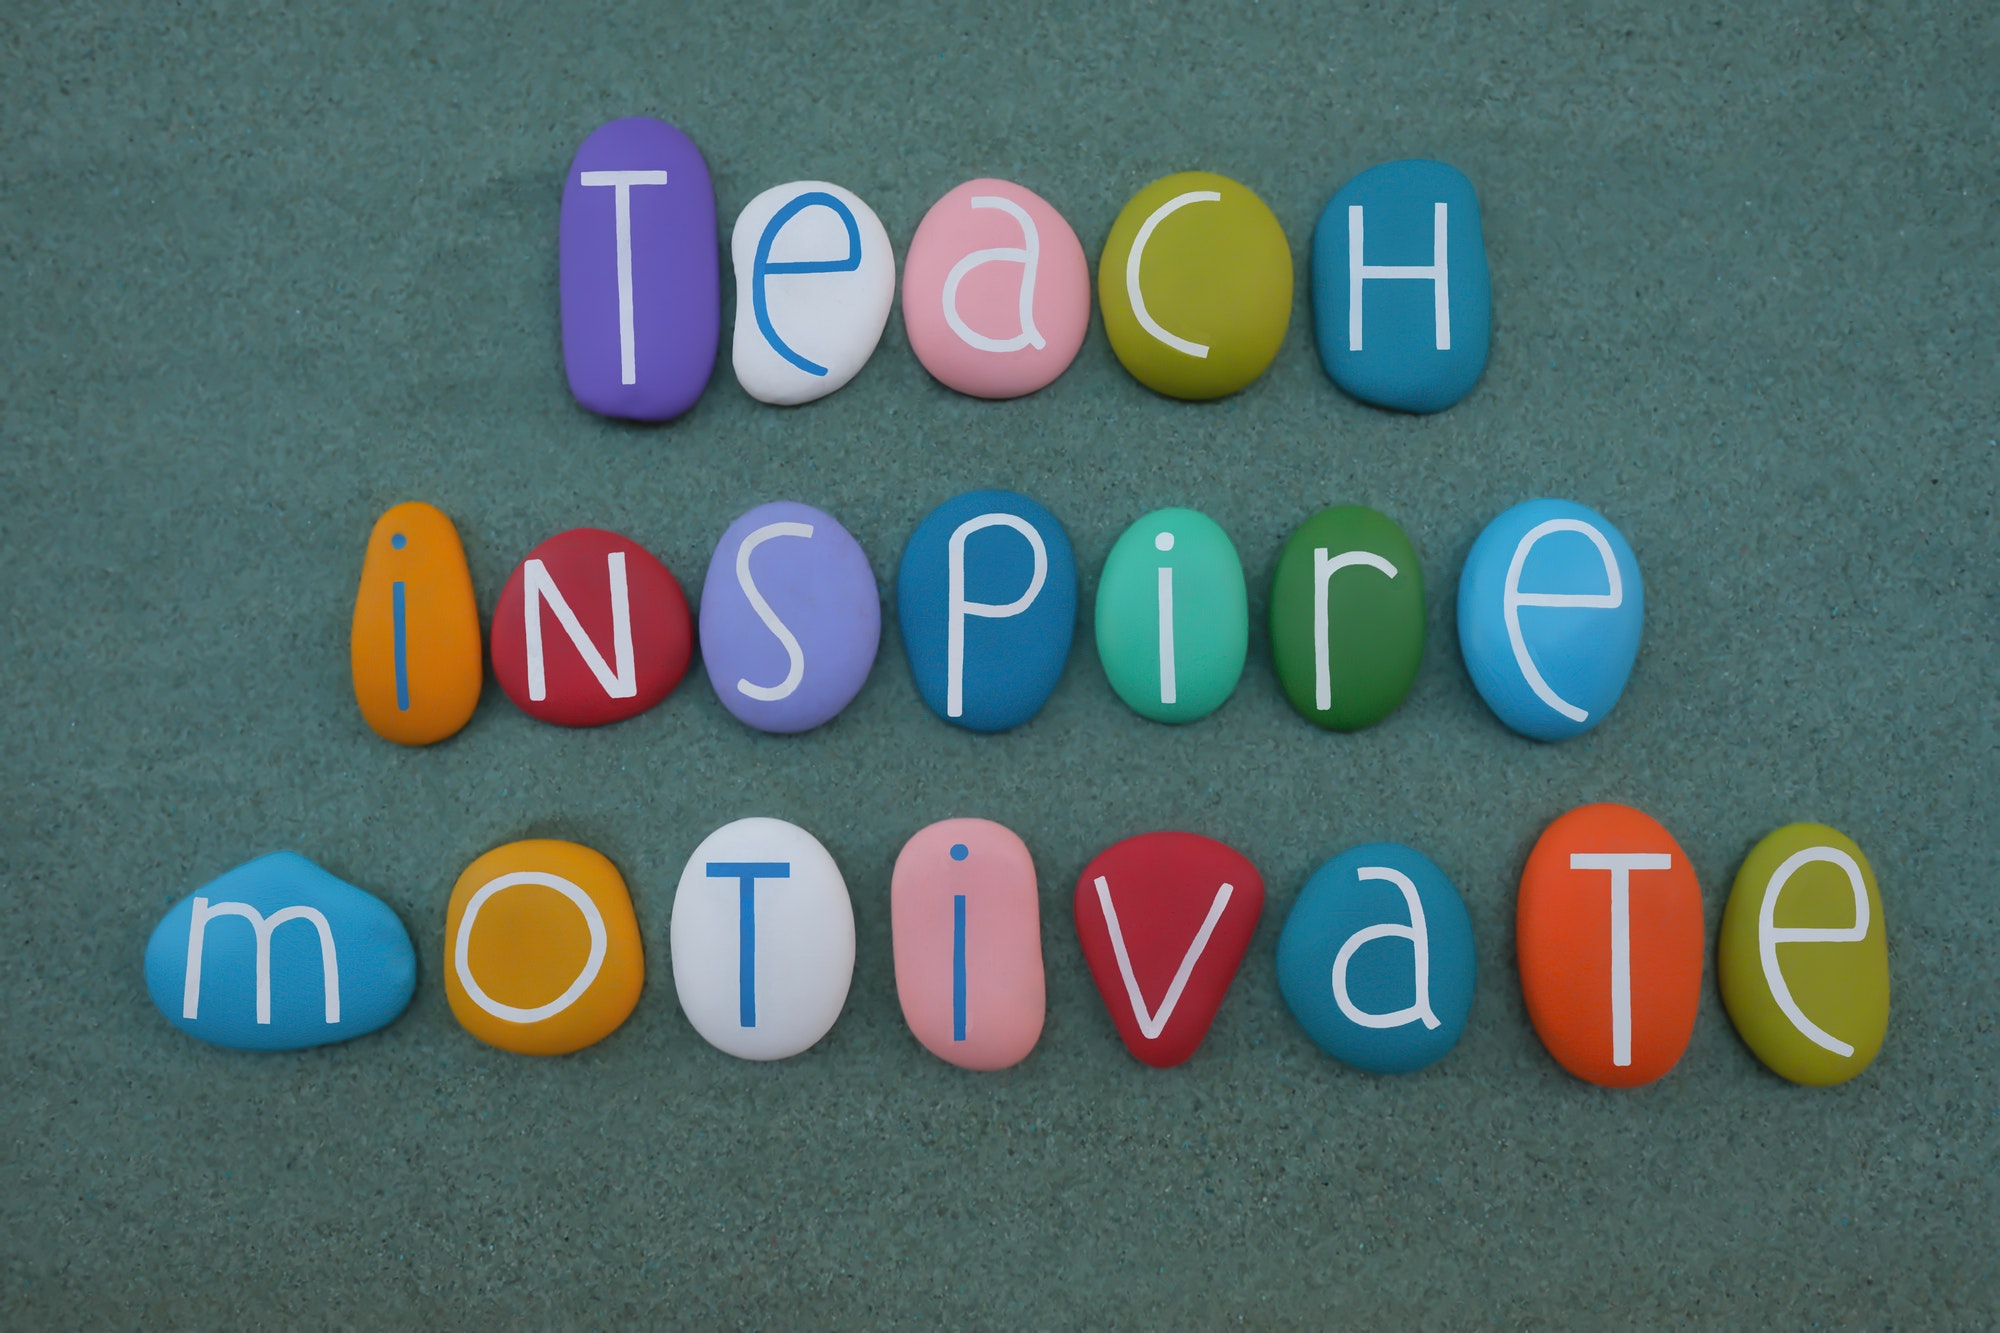 Teach, Inspire, Motivate, creative quote, educational text composed with multicolored stone letters